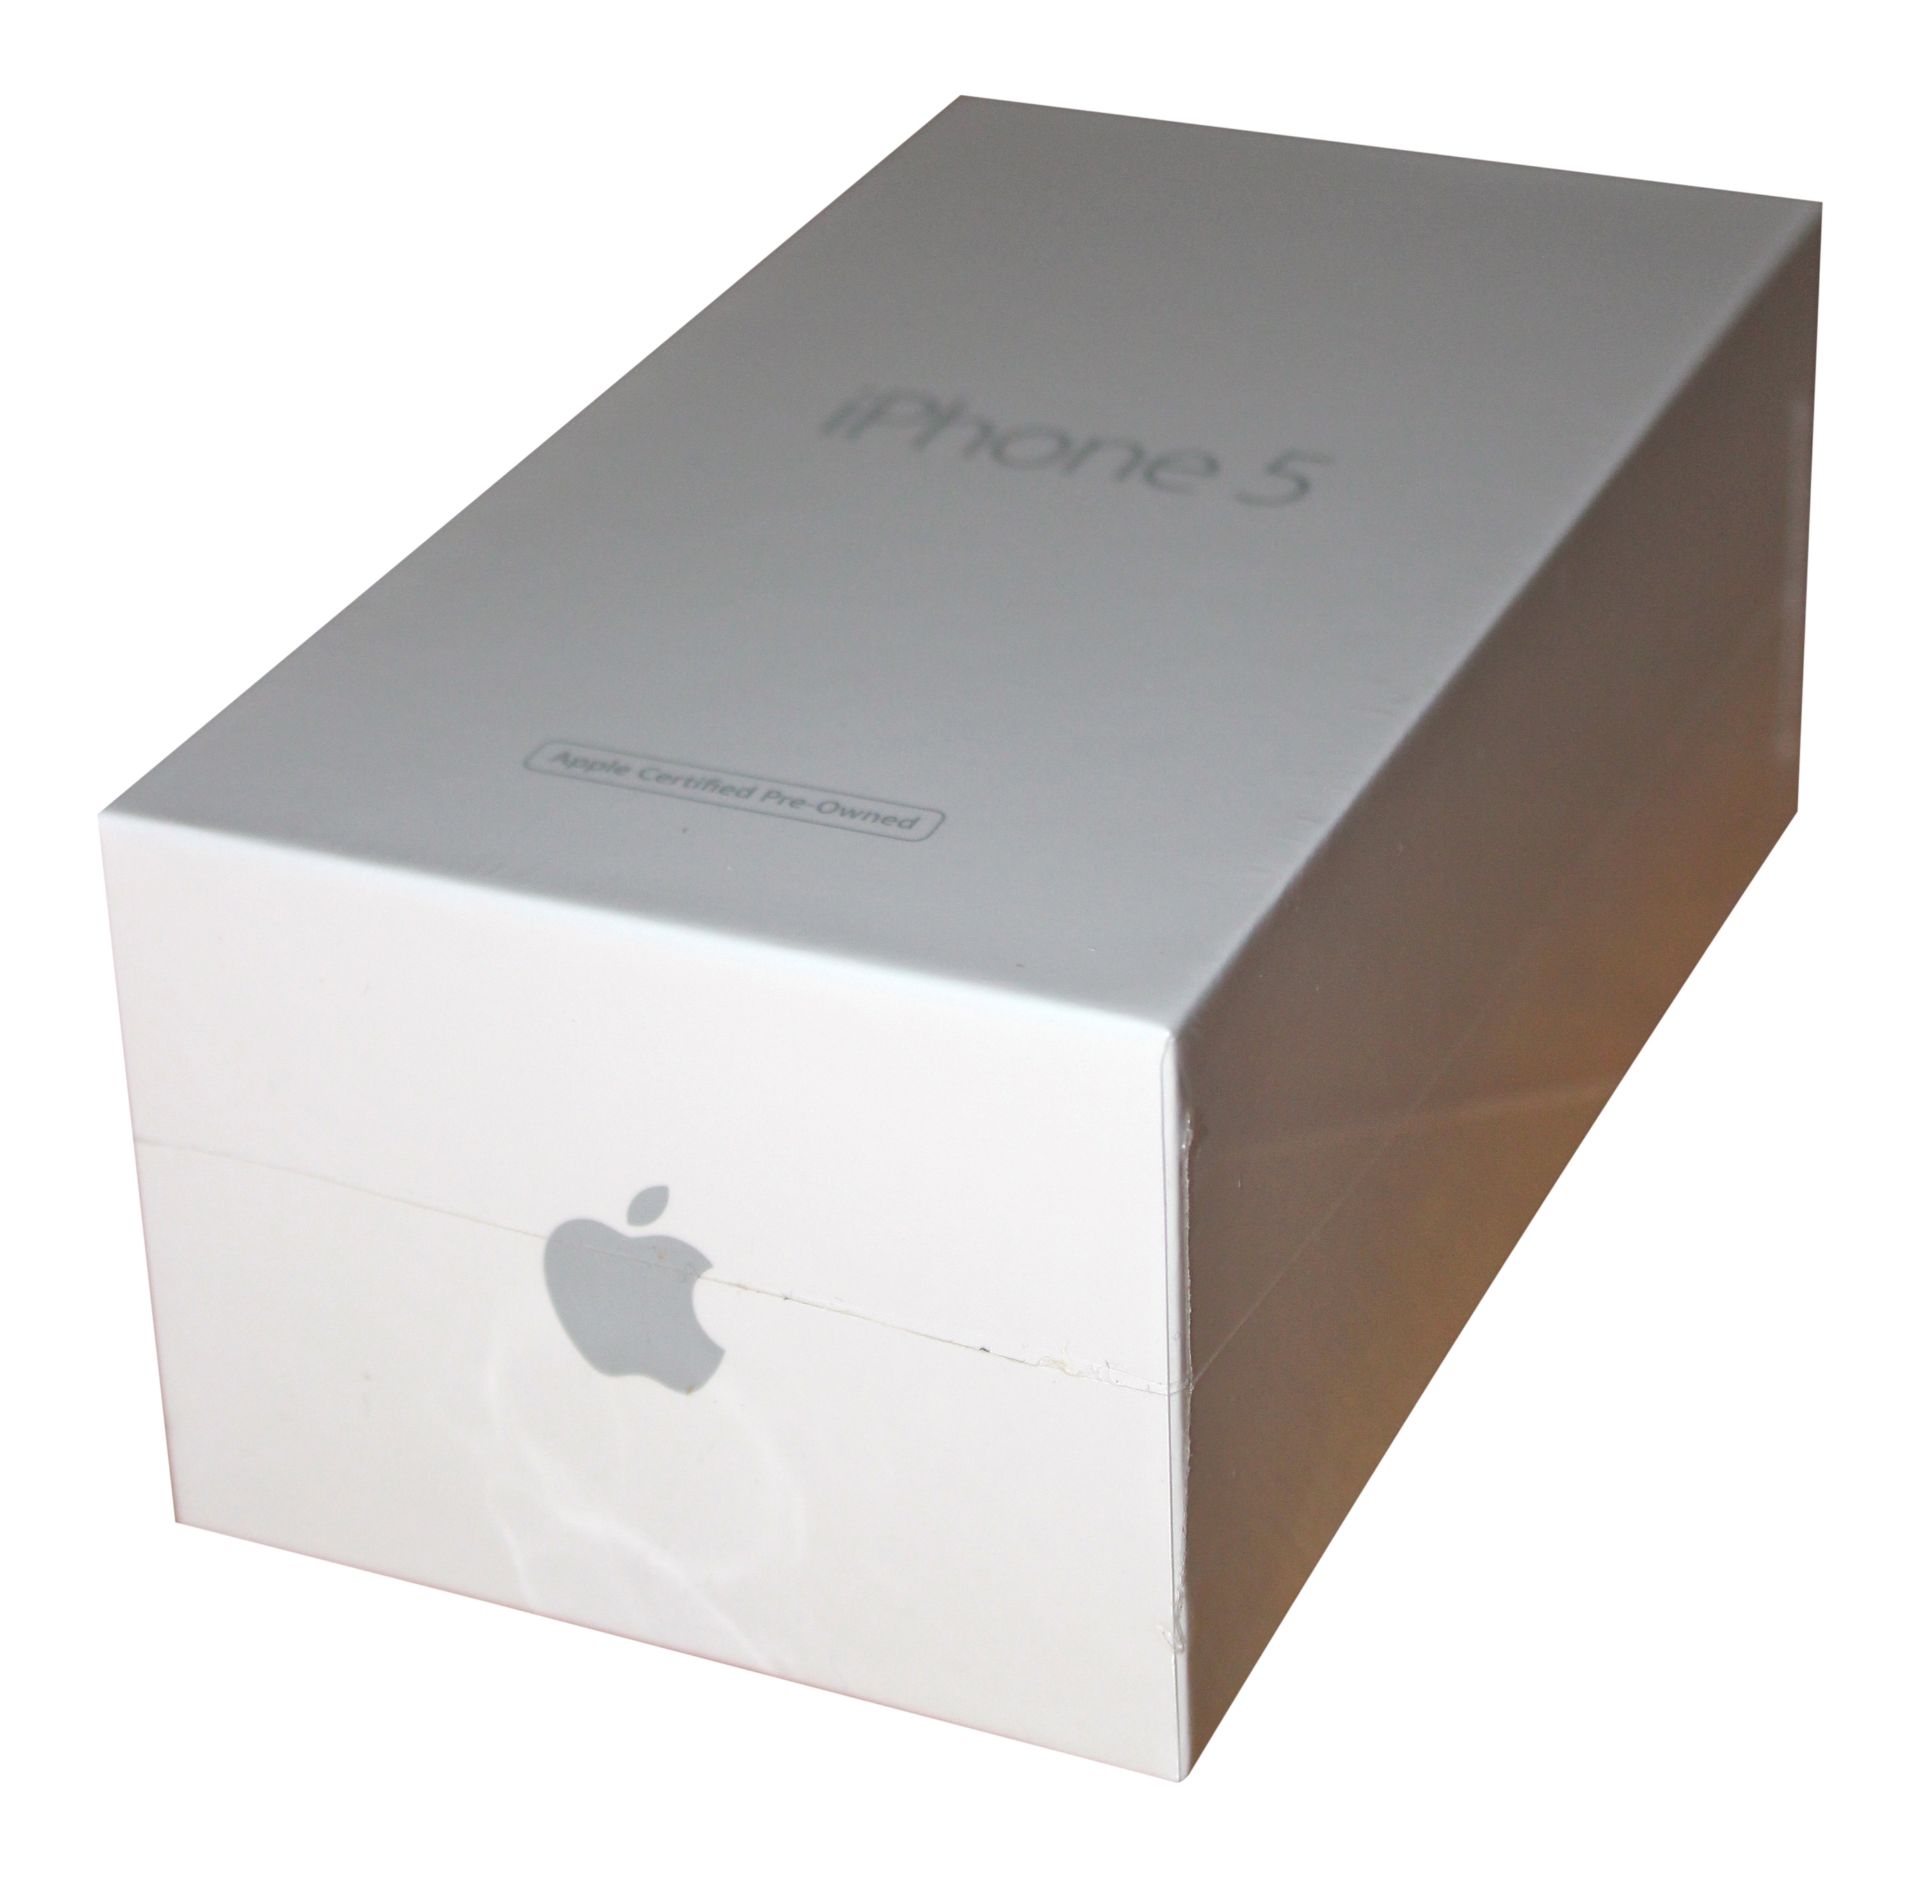 Brand New Apple iphone 5 16GB White - Preowned Apple Certified x 1 unit - Image 3 of 4